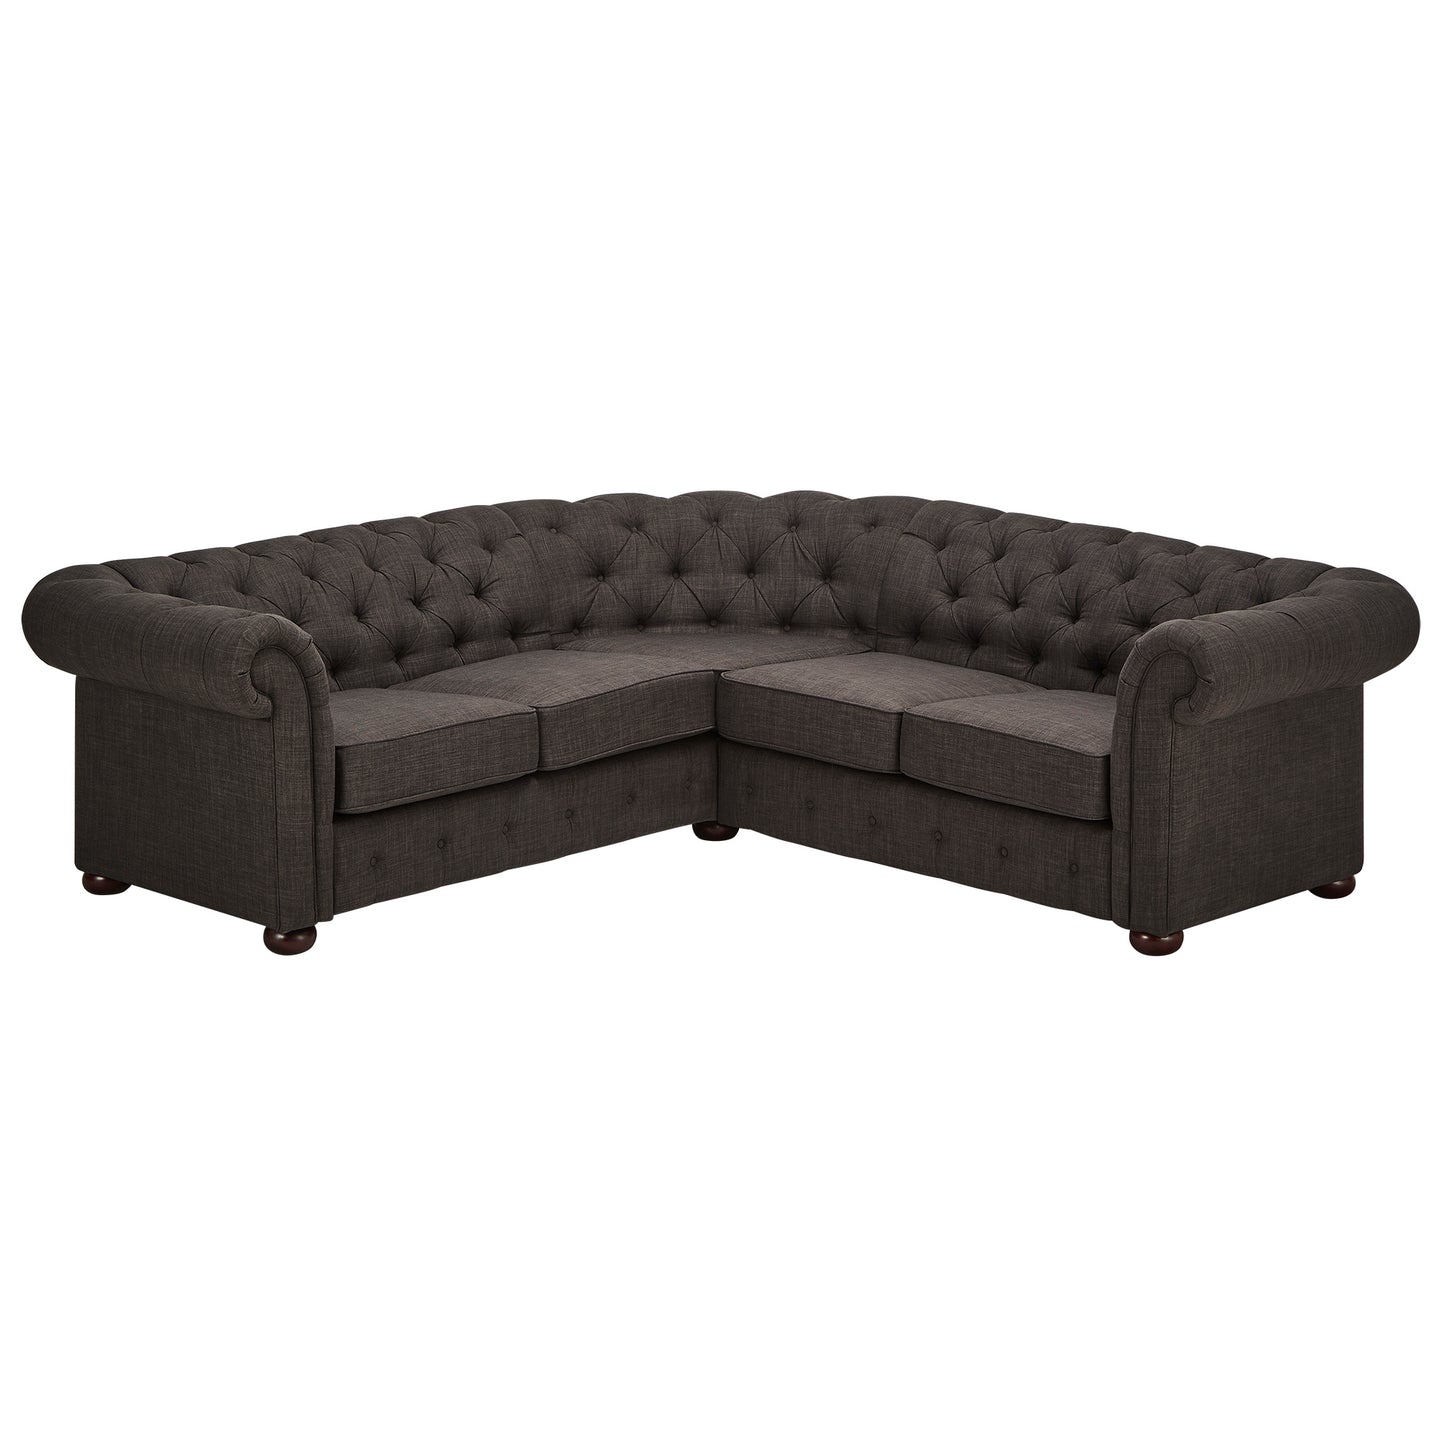 5-Seat L-Shaped Chesterfield Sectional Sofa - Dark Grey Linen